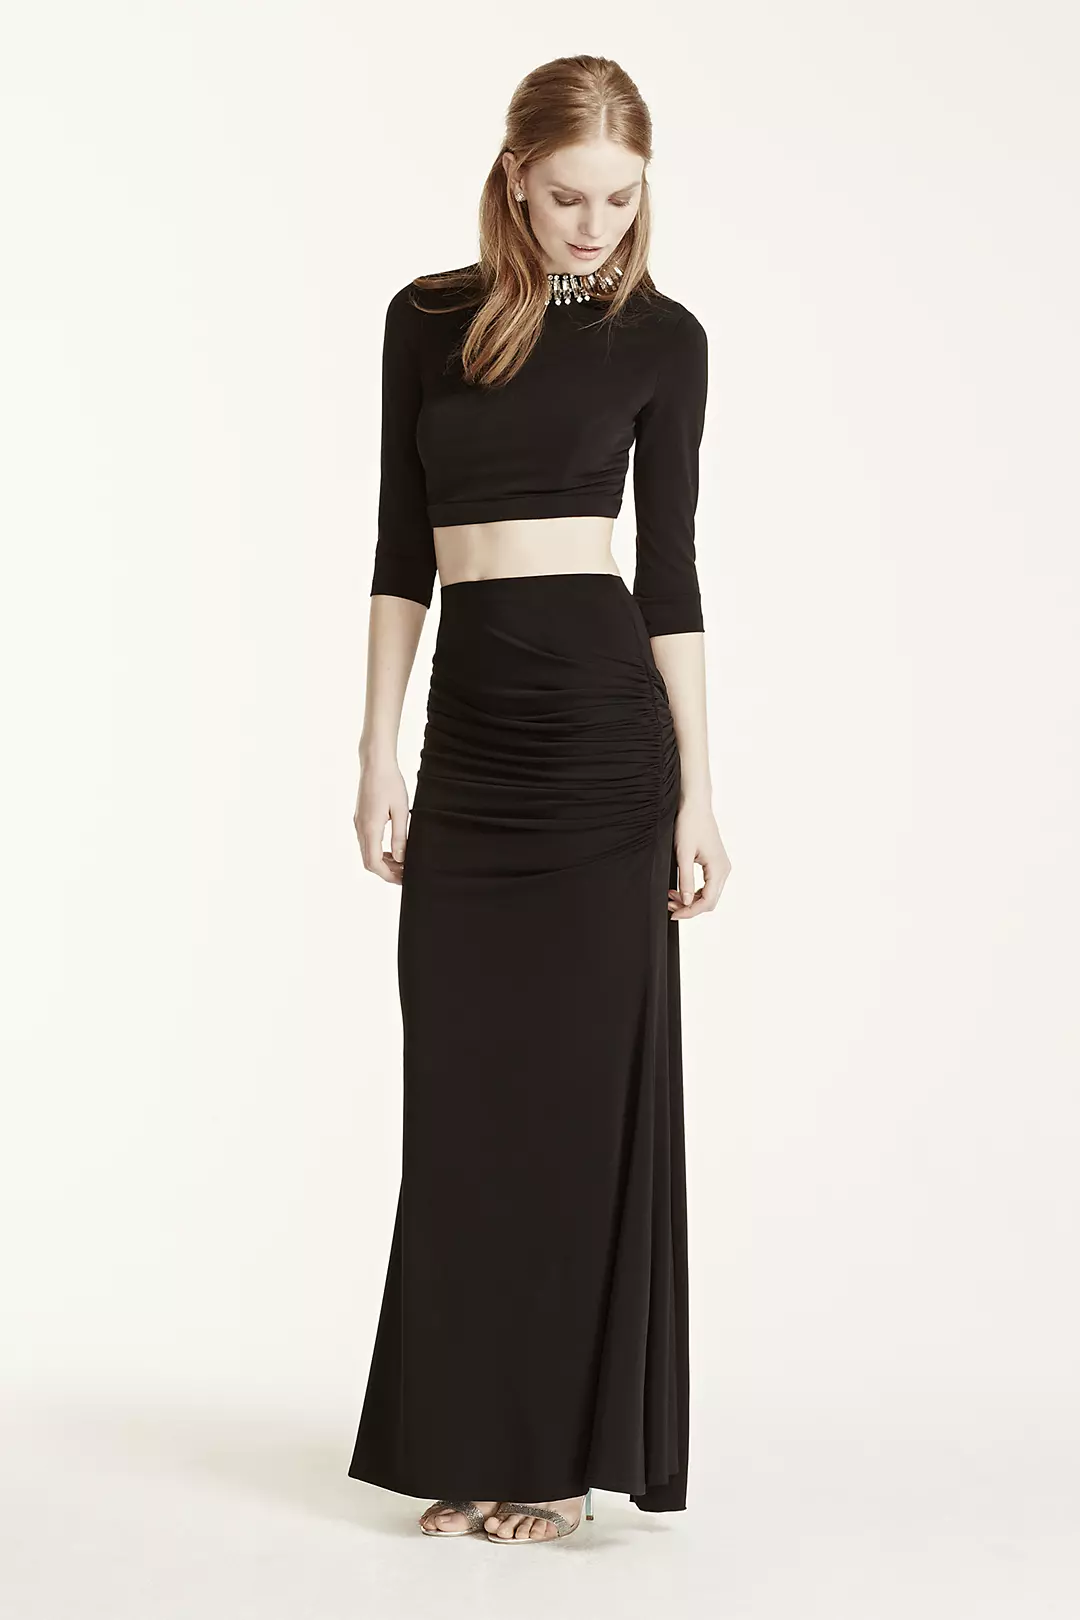 Two Piece Beaded Collar Crop with Jersey Skirt Image